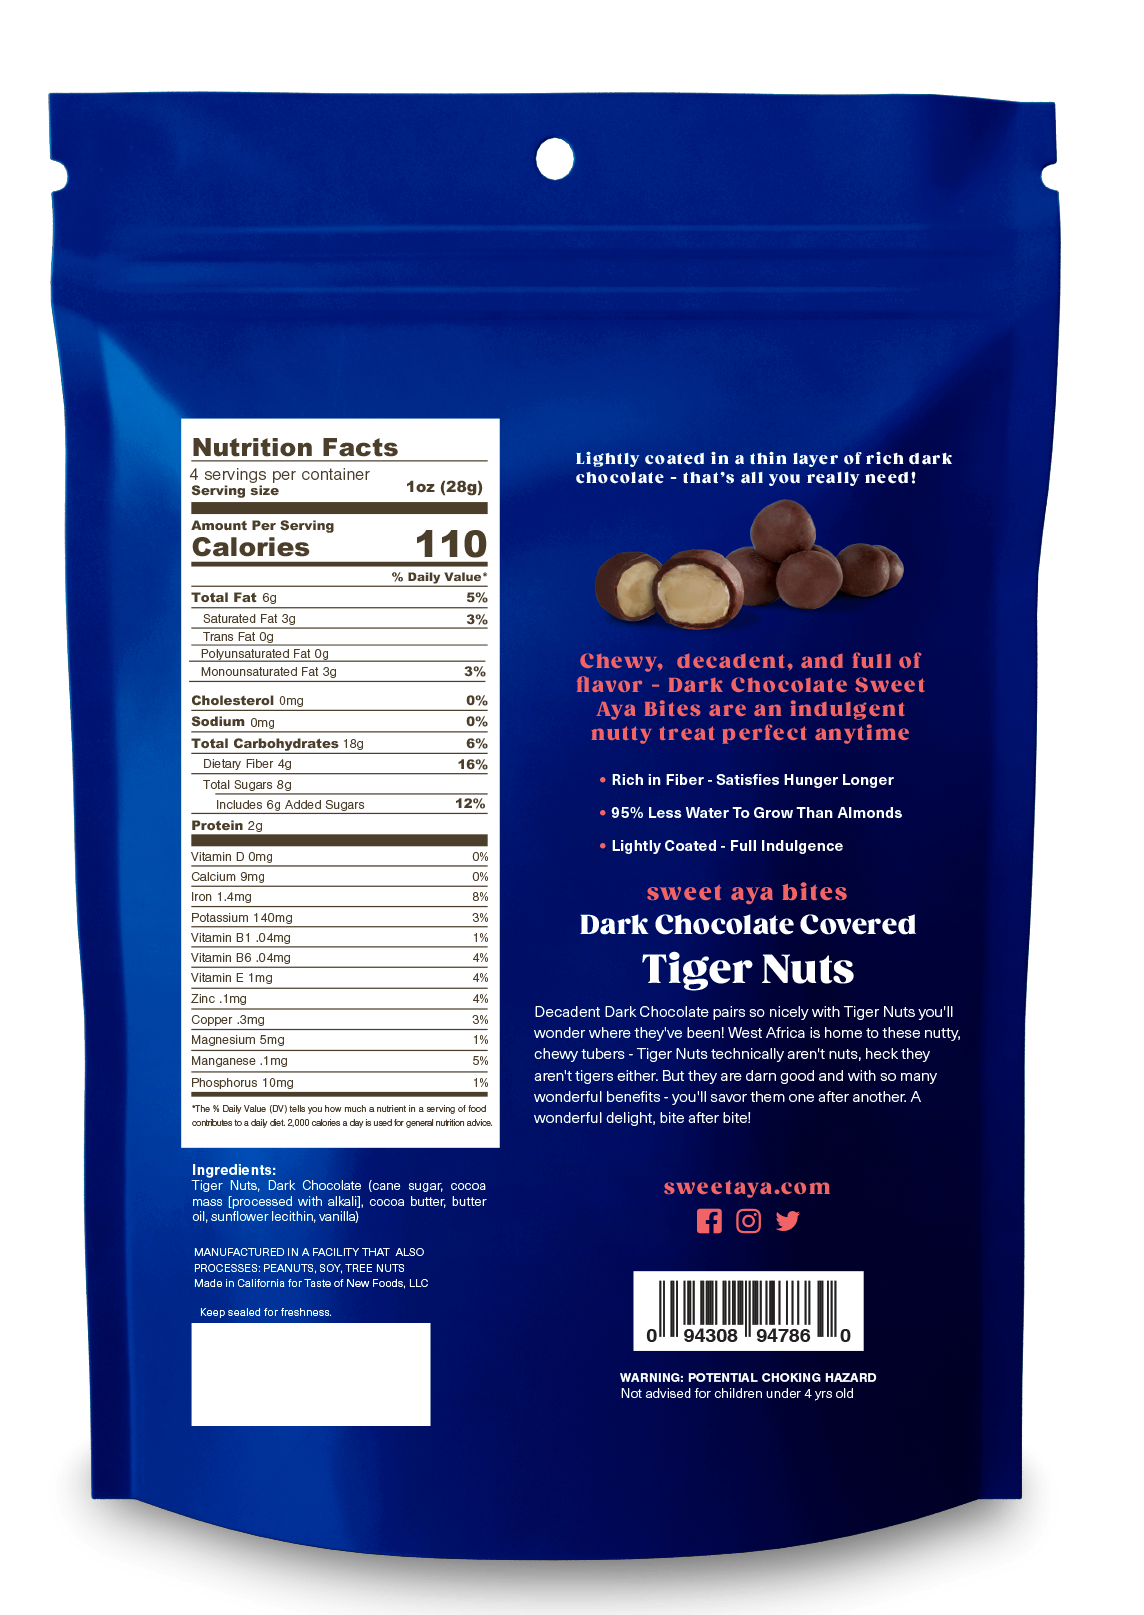 Dark chocolate-covered sweet aya bites tiger nuts healthy, low-calorie, low-fat snack food